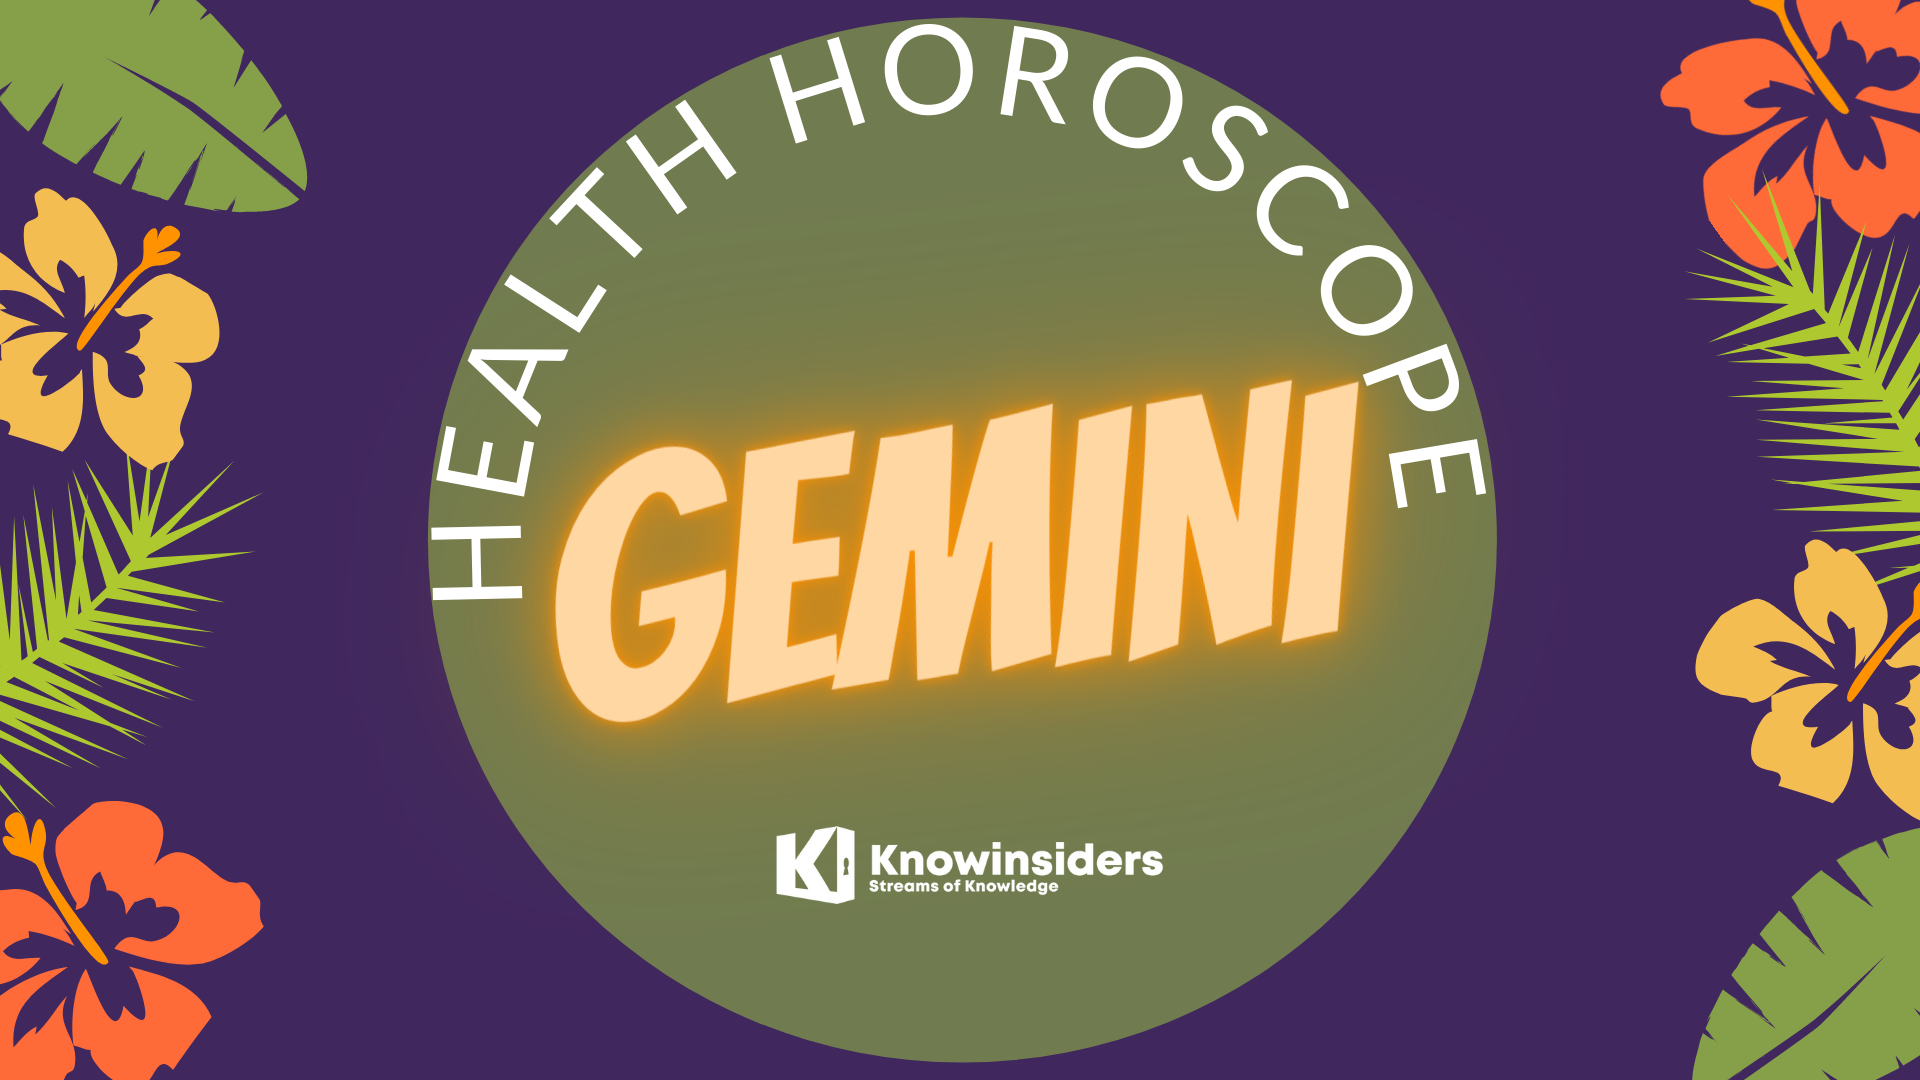 gemini horoscope prediction for beauty and health for life